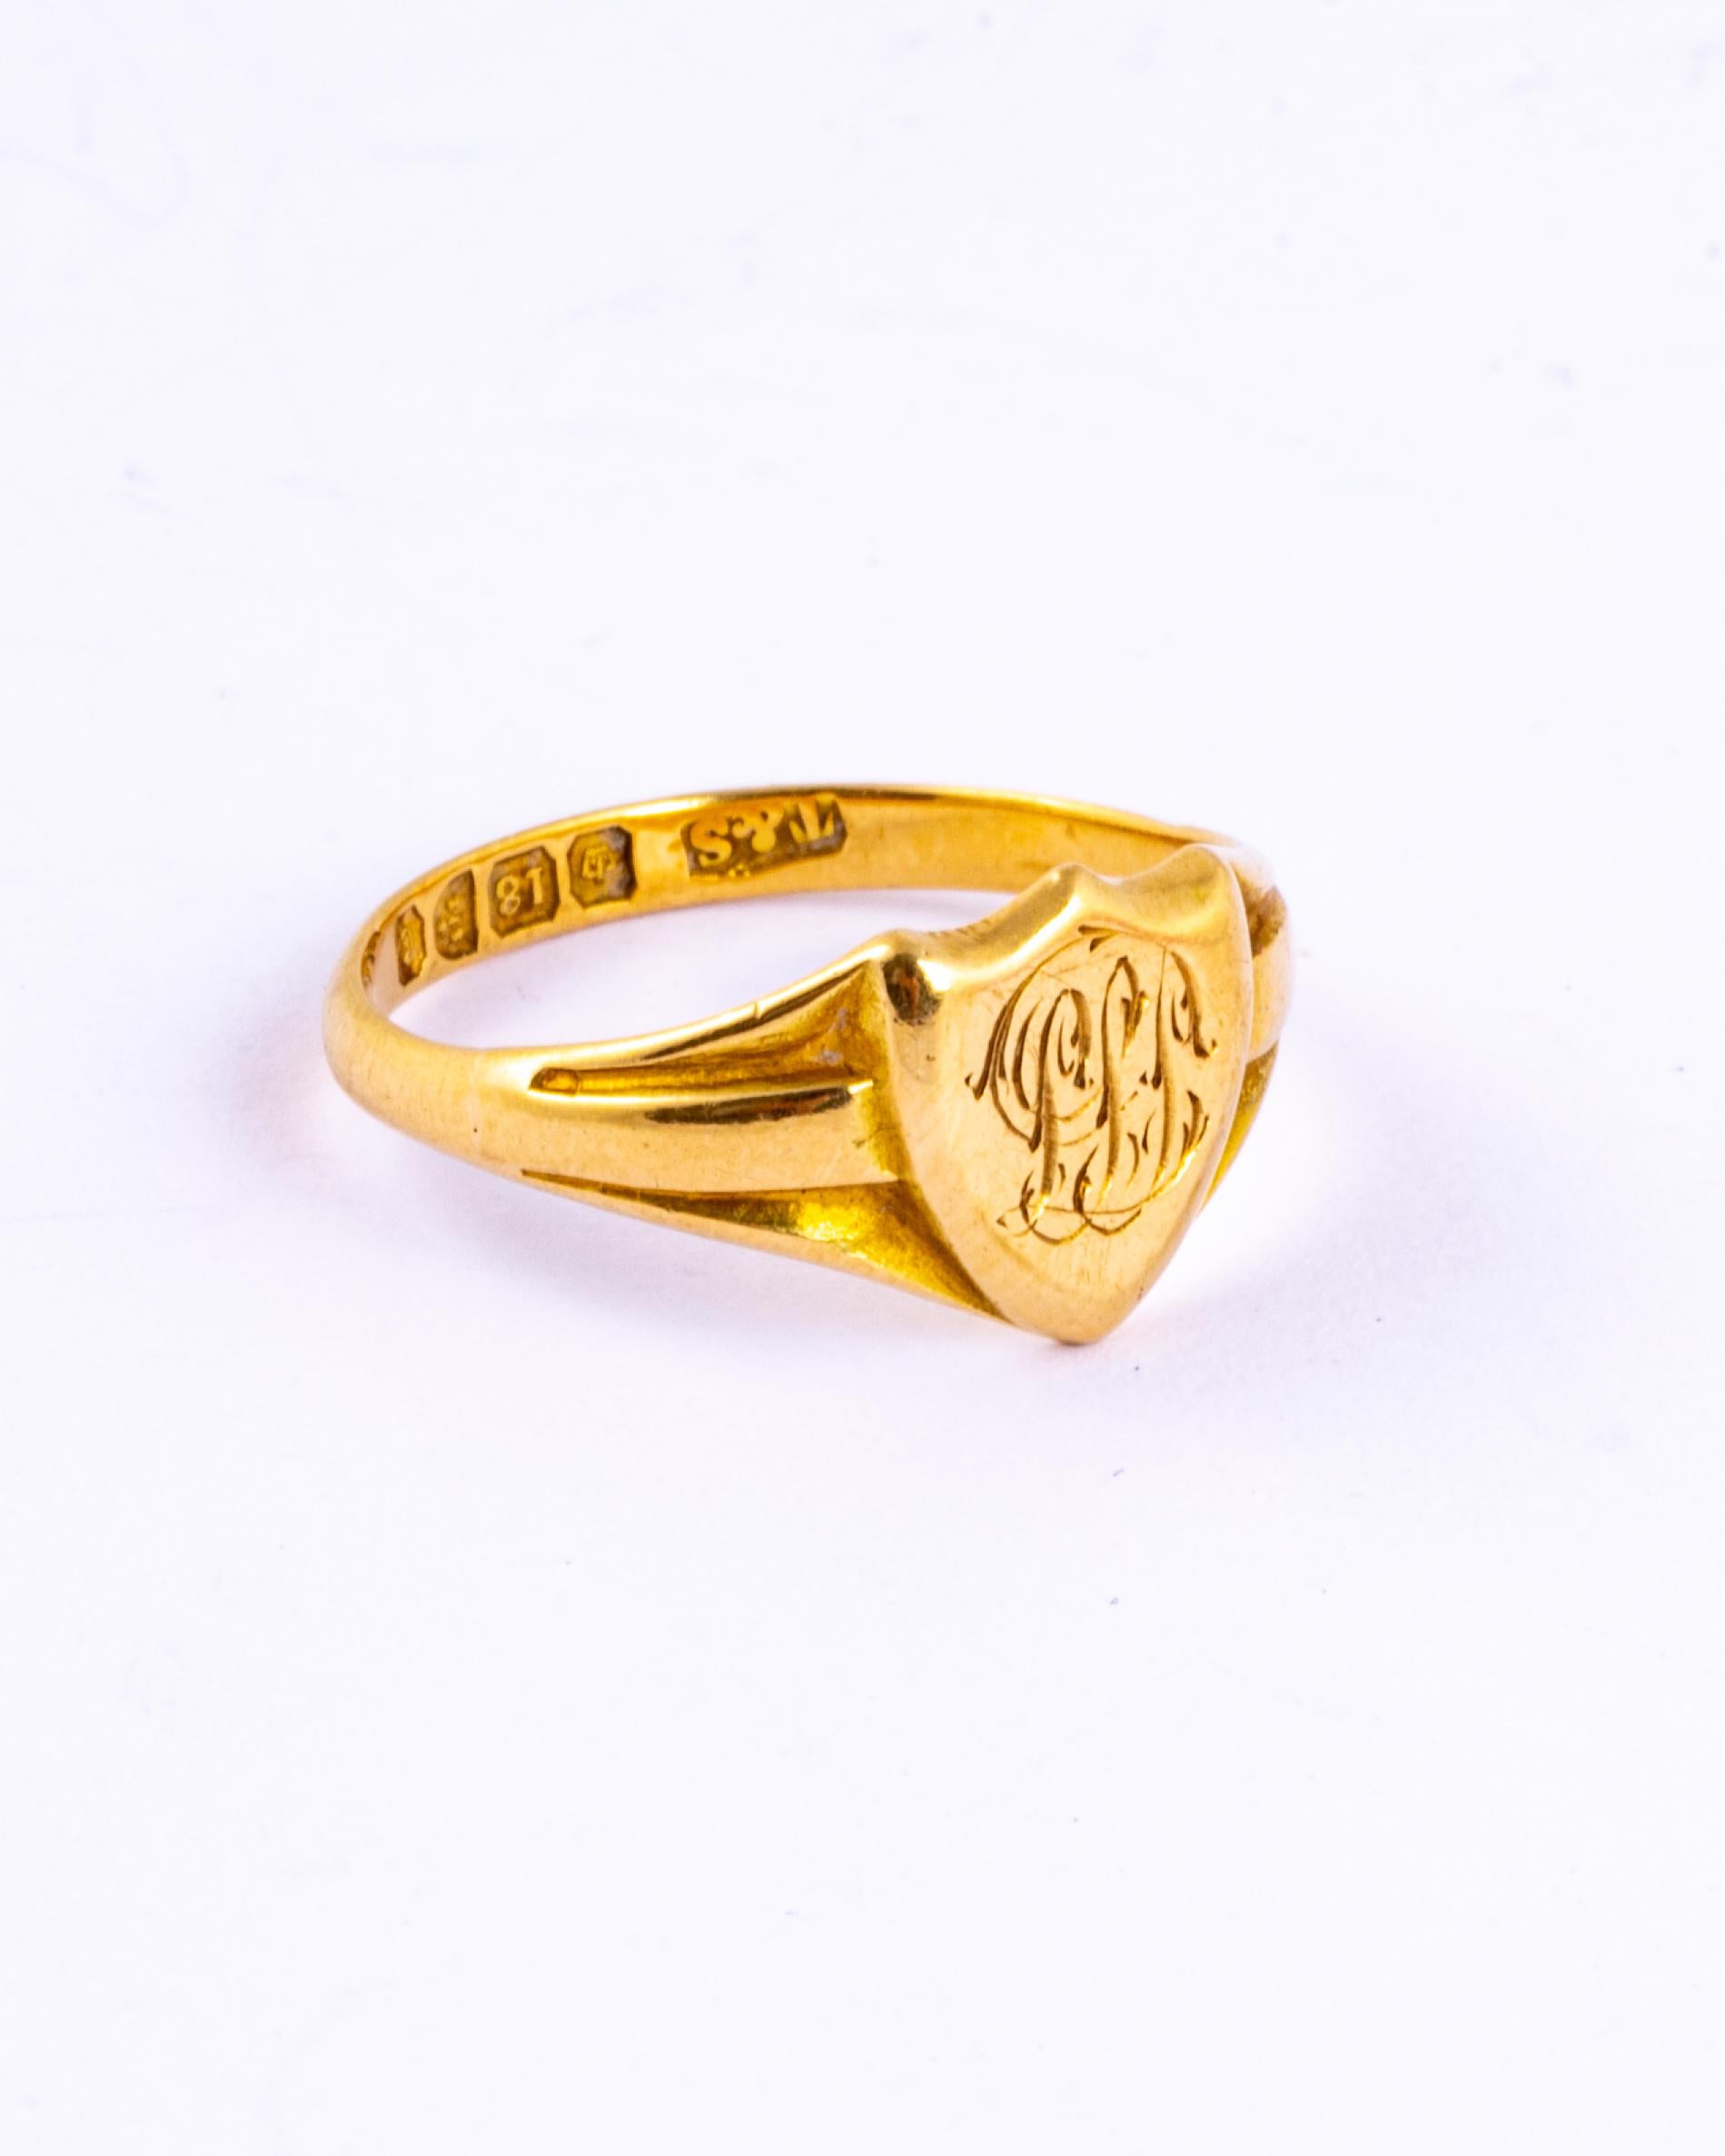 The main detail on this ring is the shield with initials engraved into it.  The chunky shoulders are smooth and carry on down into a plain band modelled in 9ct gold. Made in Chester, England.

RIng Size: N 1/2 or 7 
Widest Part: 10mm 

Weight: 3.3g